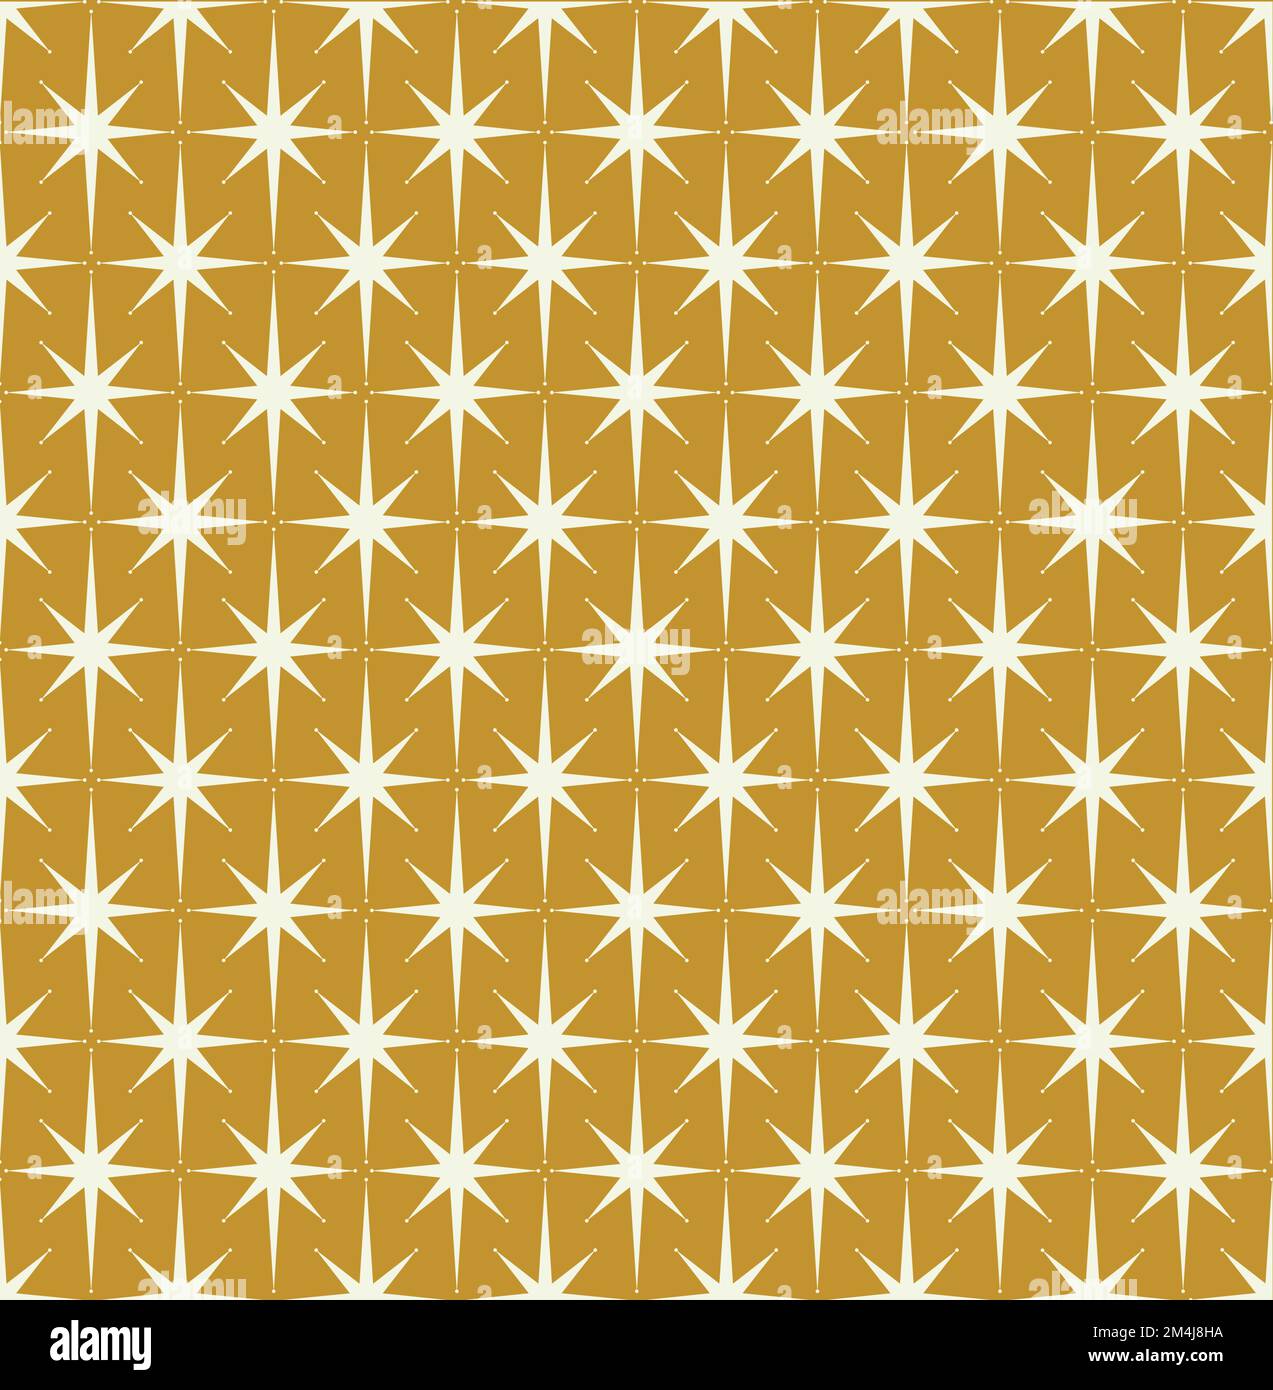 Mid-century modern wrapping paper in starburst pattern on gold background. Inspired by Atomic era. Repeatable and seamless Stock Vector